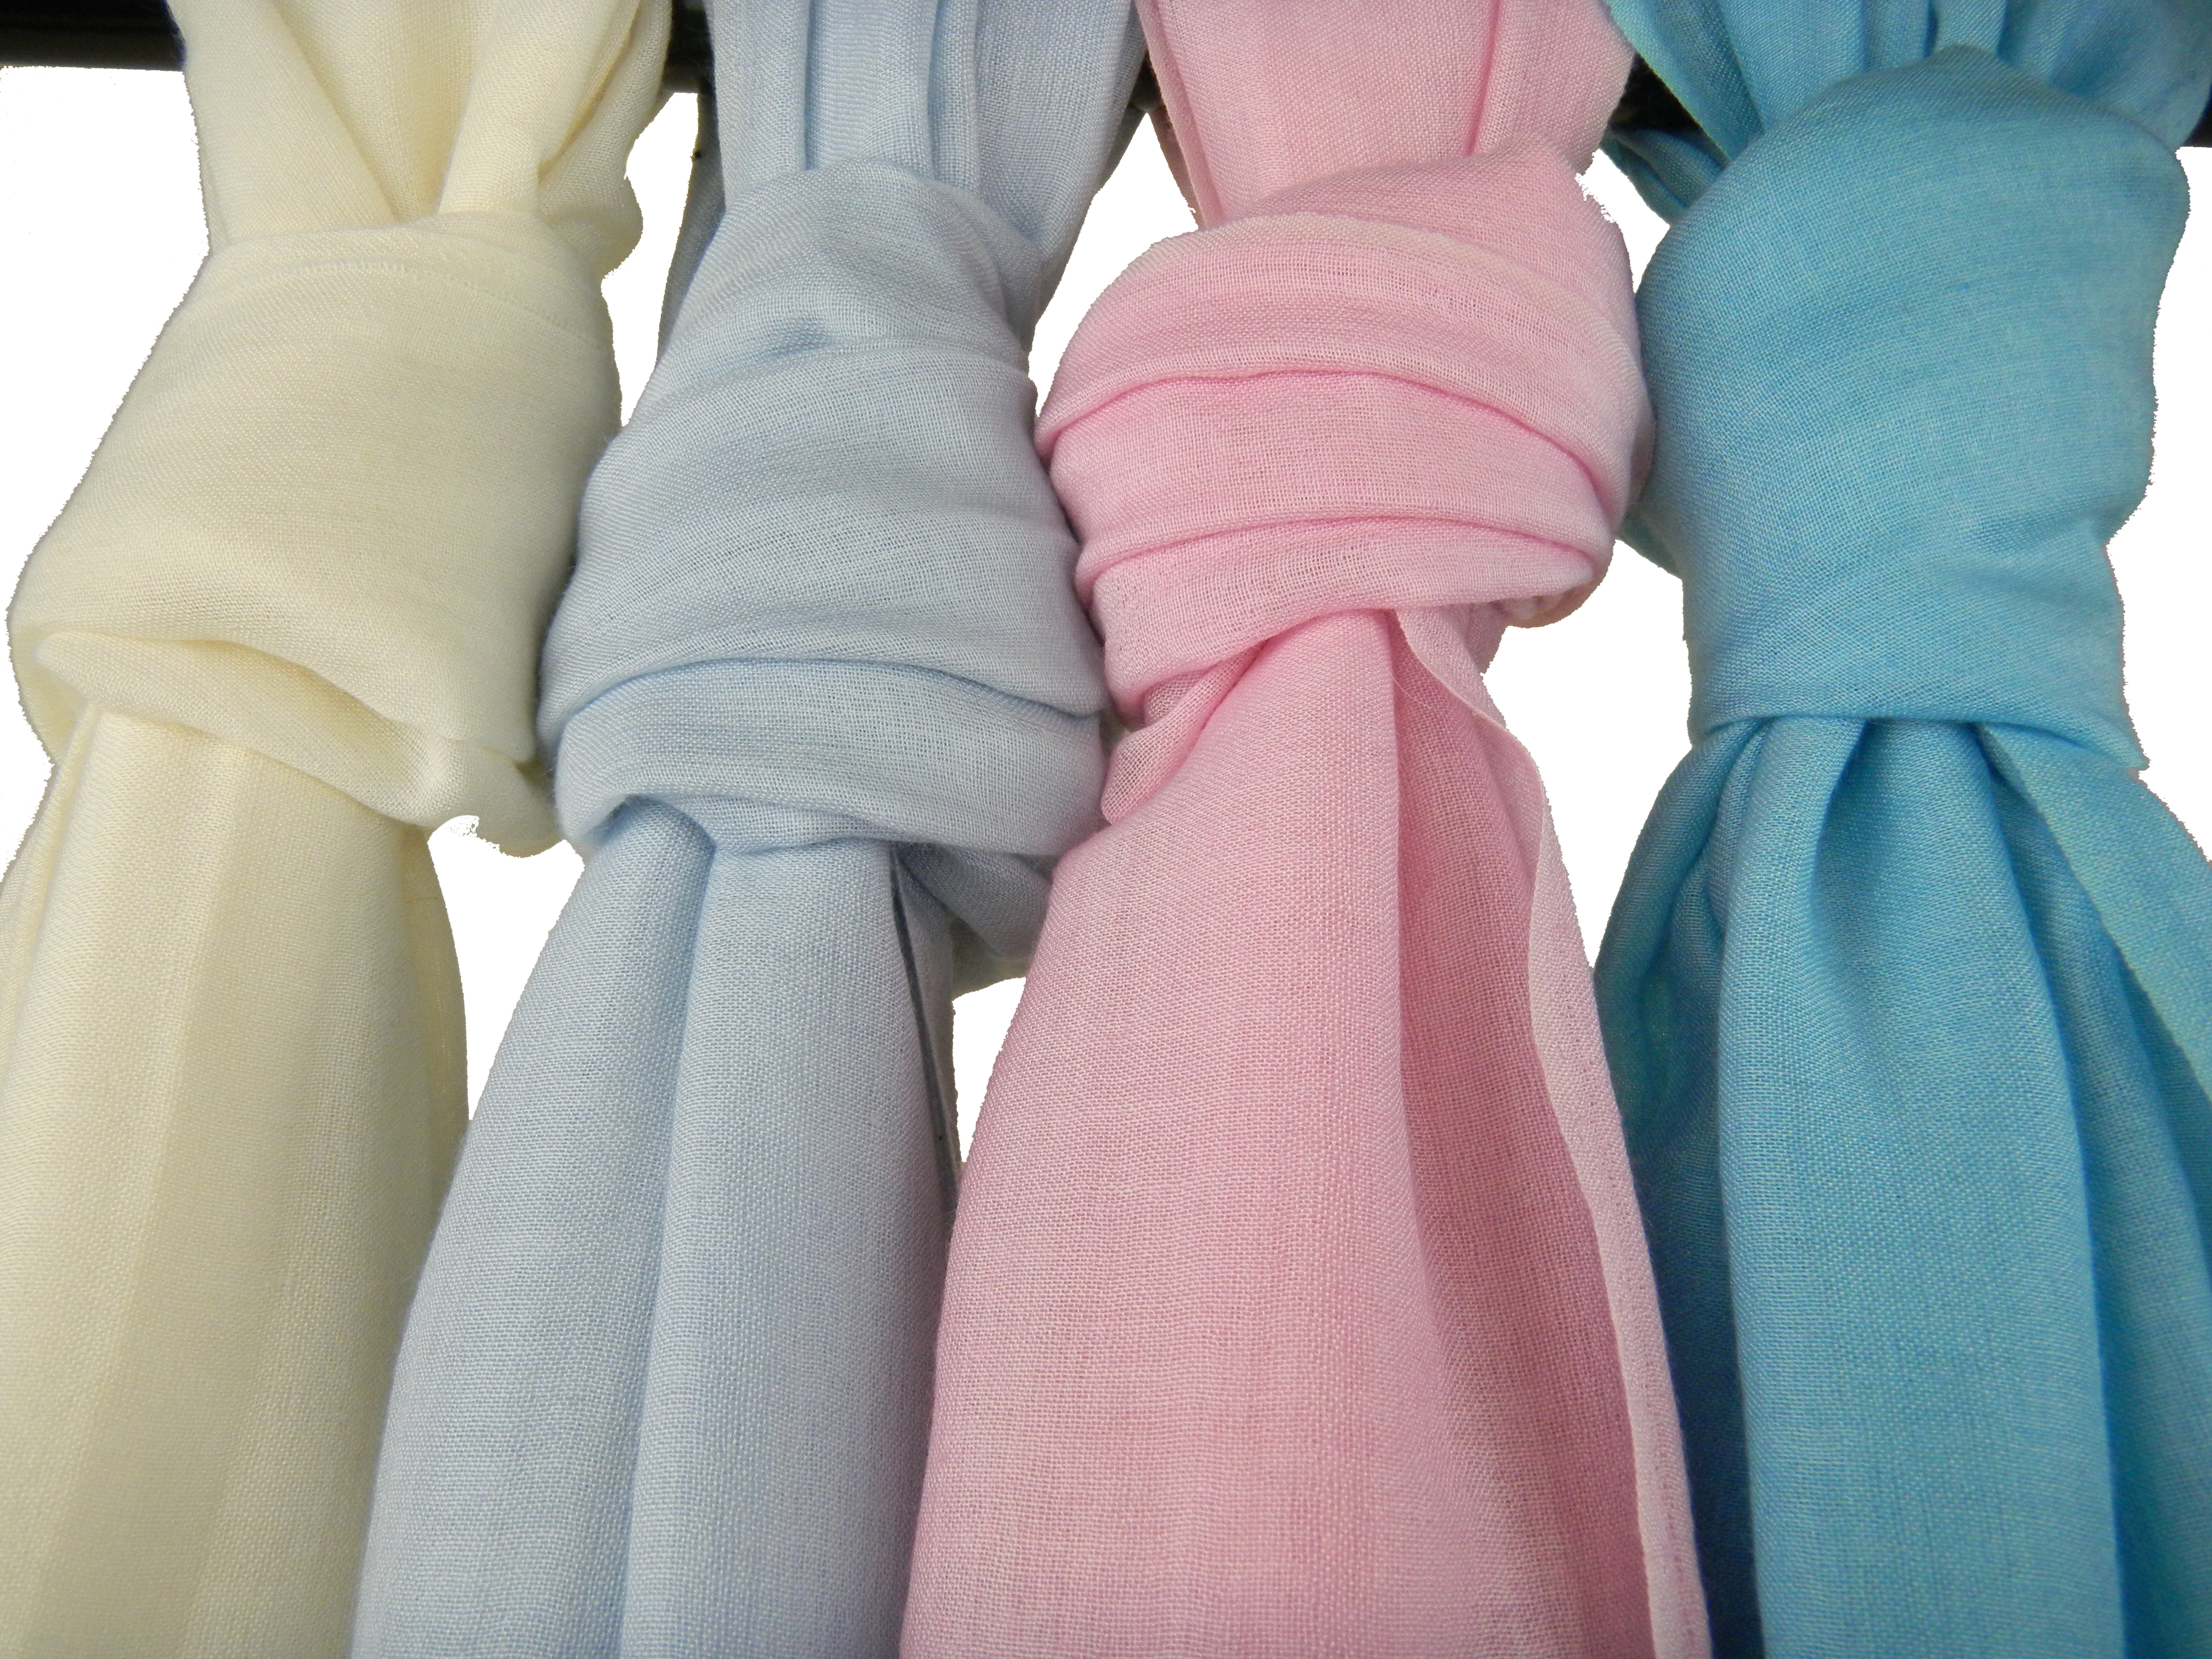 Pashmina Water Stoles by The Pashmina Store